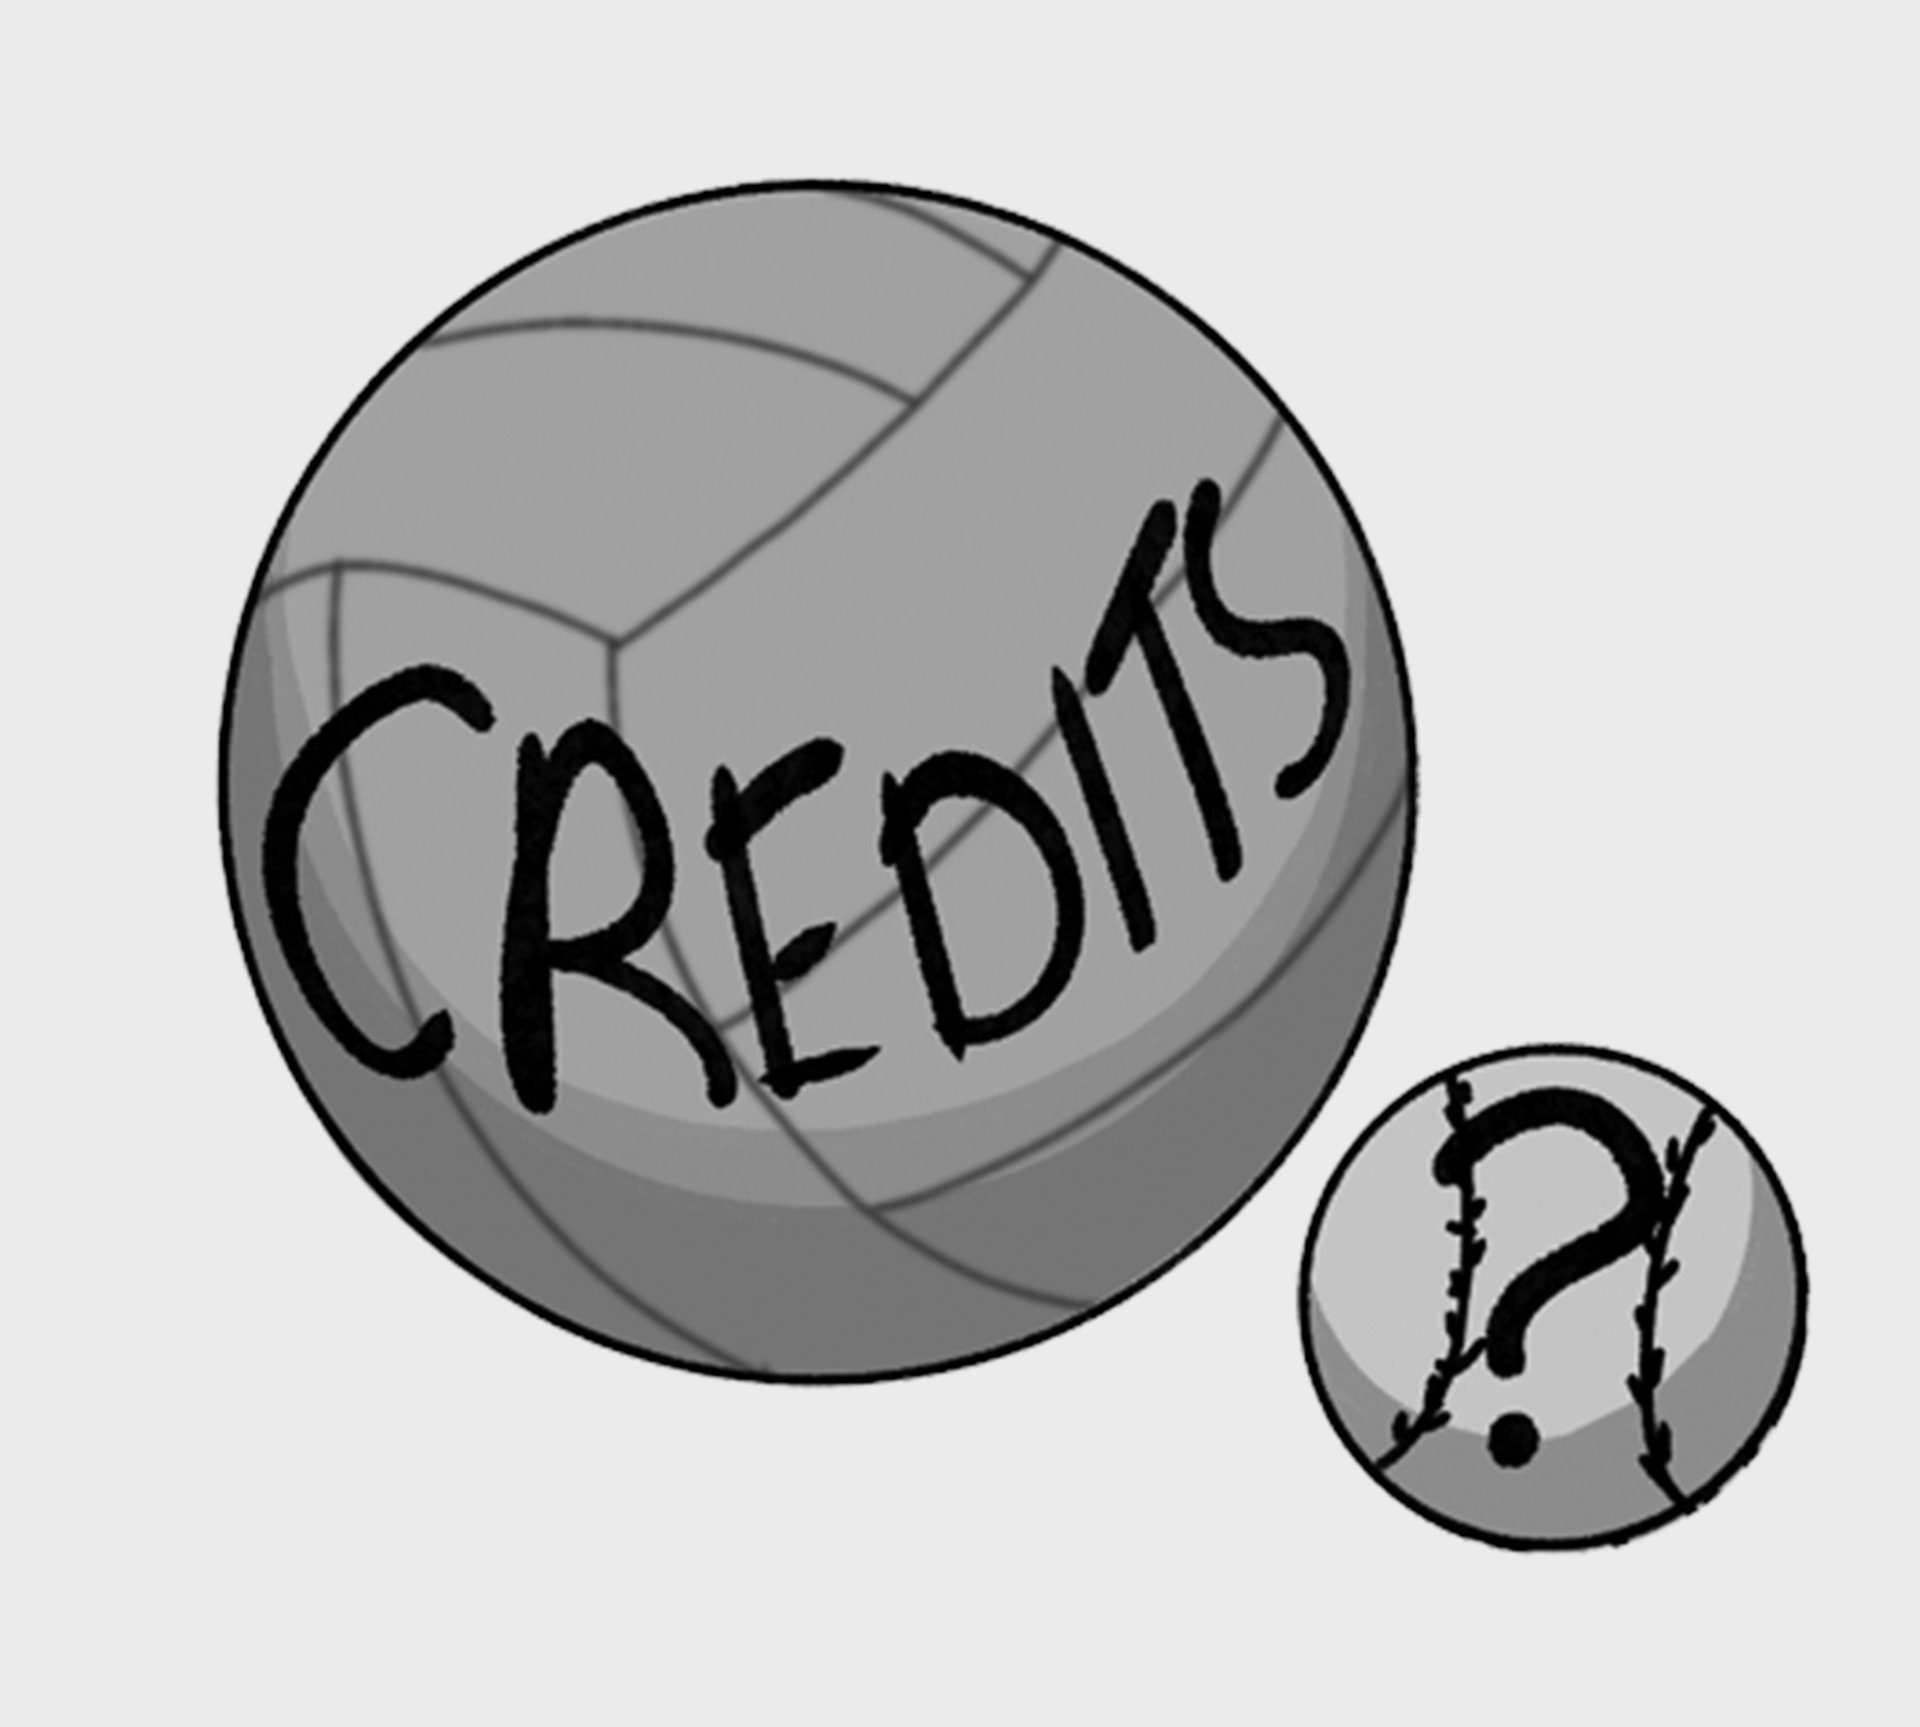 Do Sports for Credit